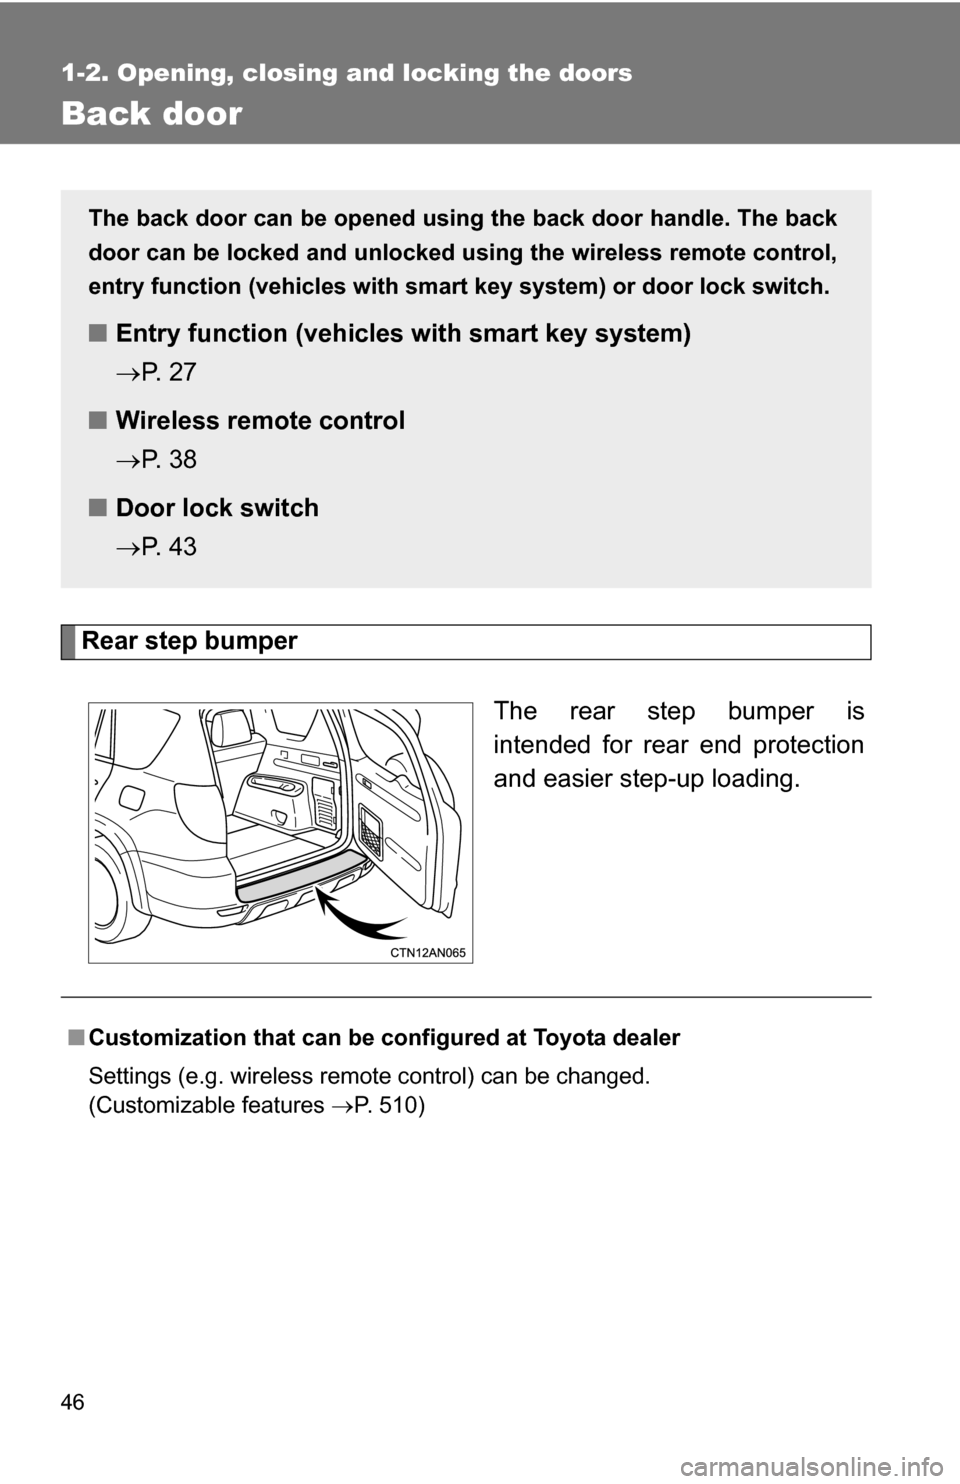 TOYOTA RAV4 2012 XA30 / 3.G Service Manual 46
1-2. Opening, closing and locking the doors
Back door
Rear step bumperThe rear step bumper is
intended for rear end protection
and easier step-up loading.
The back door can be opened using the back